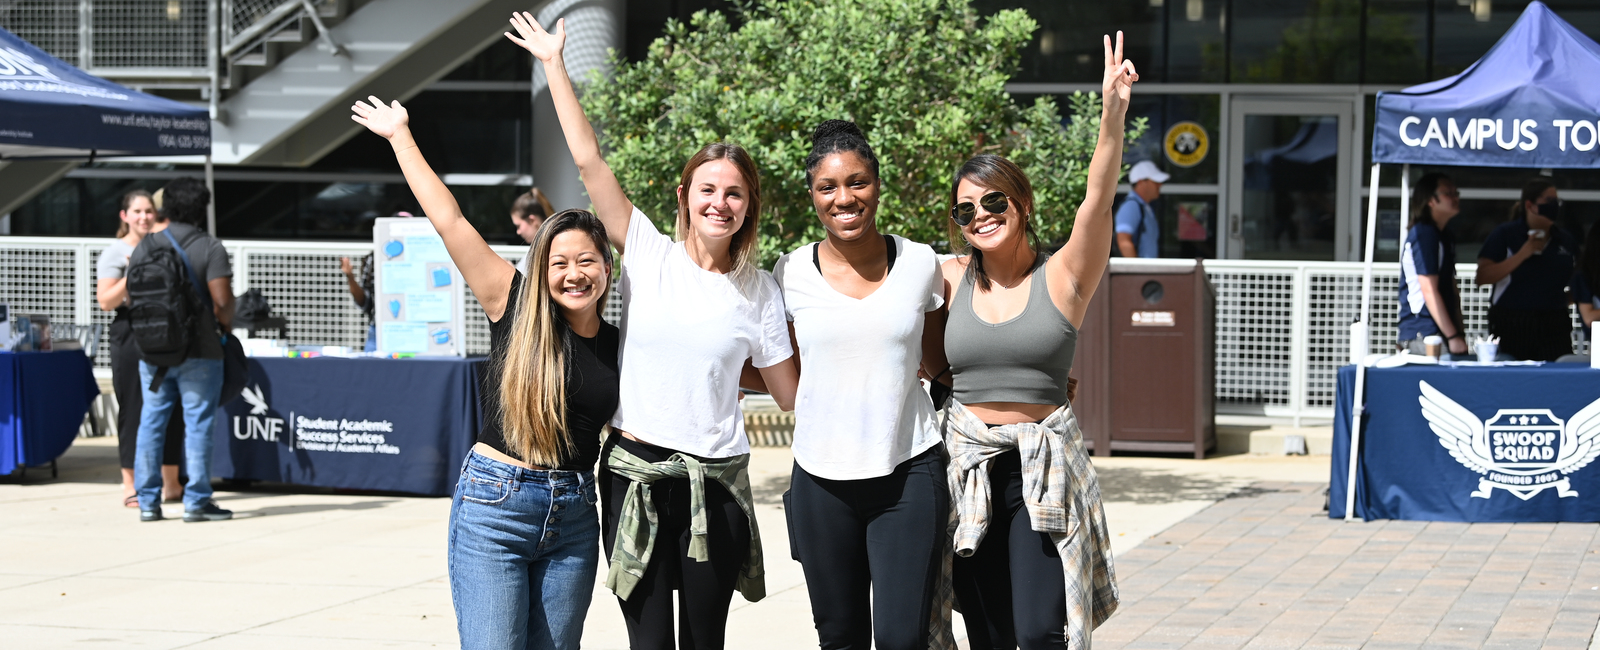 Group of four female students standing together with their hands up and smiling at the UNF student union